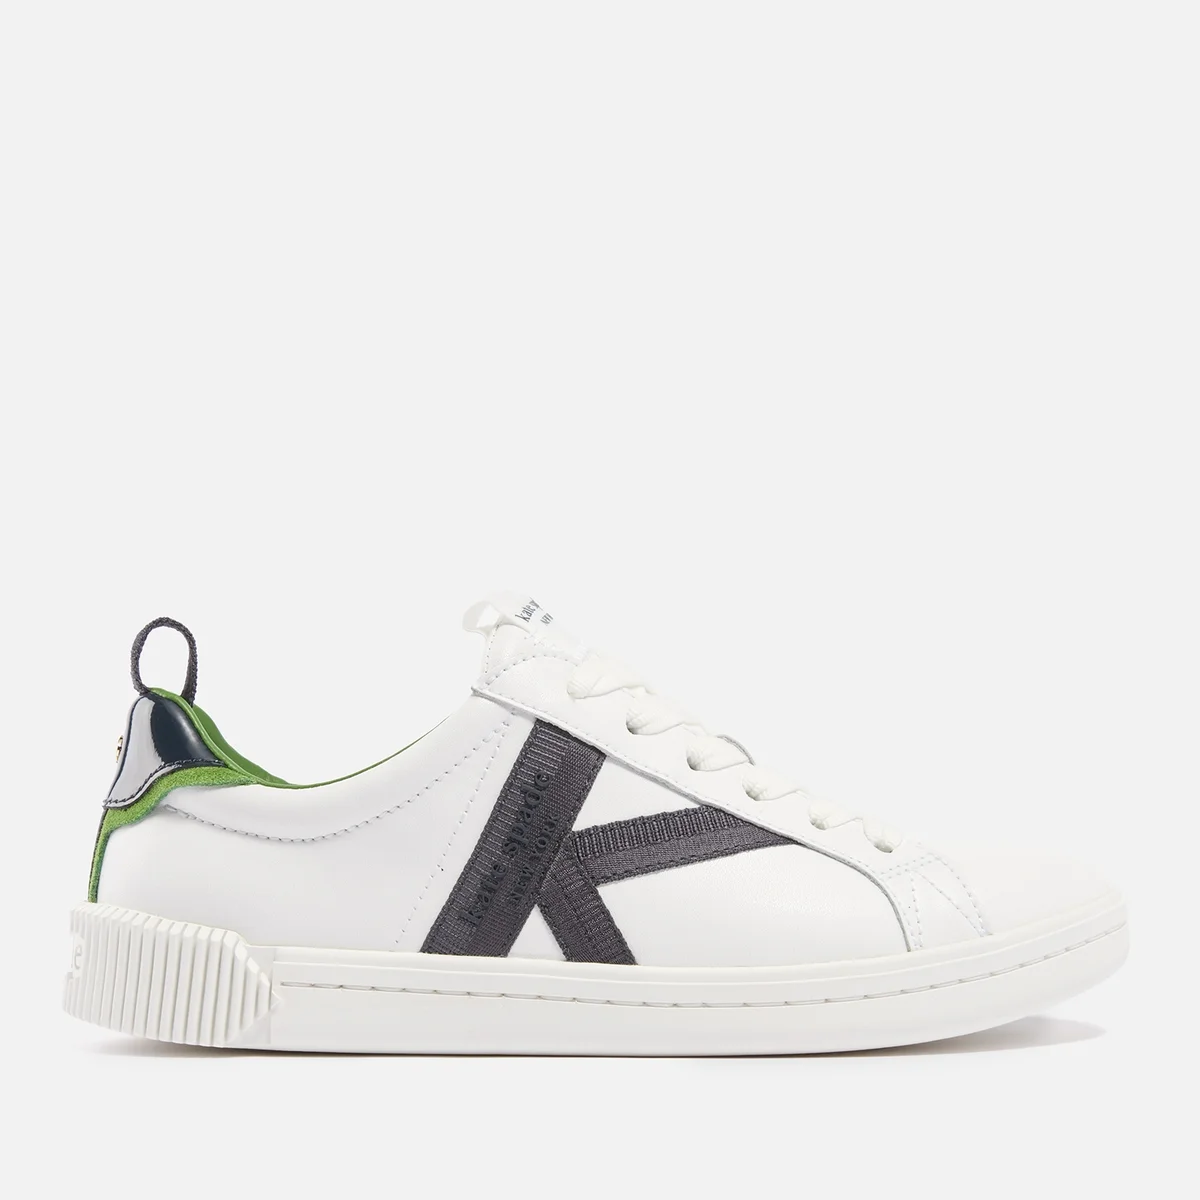 Kate Spade New York Women's Signature K Leather Cupsole Trainers Image 1